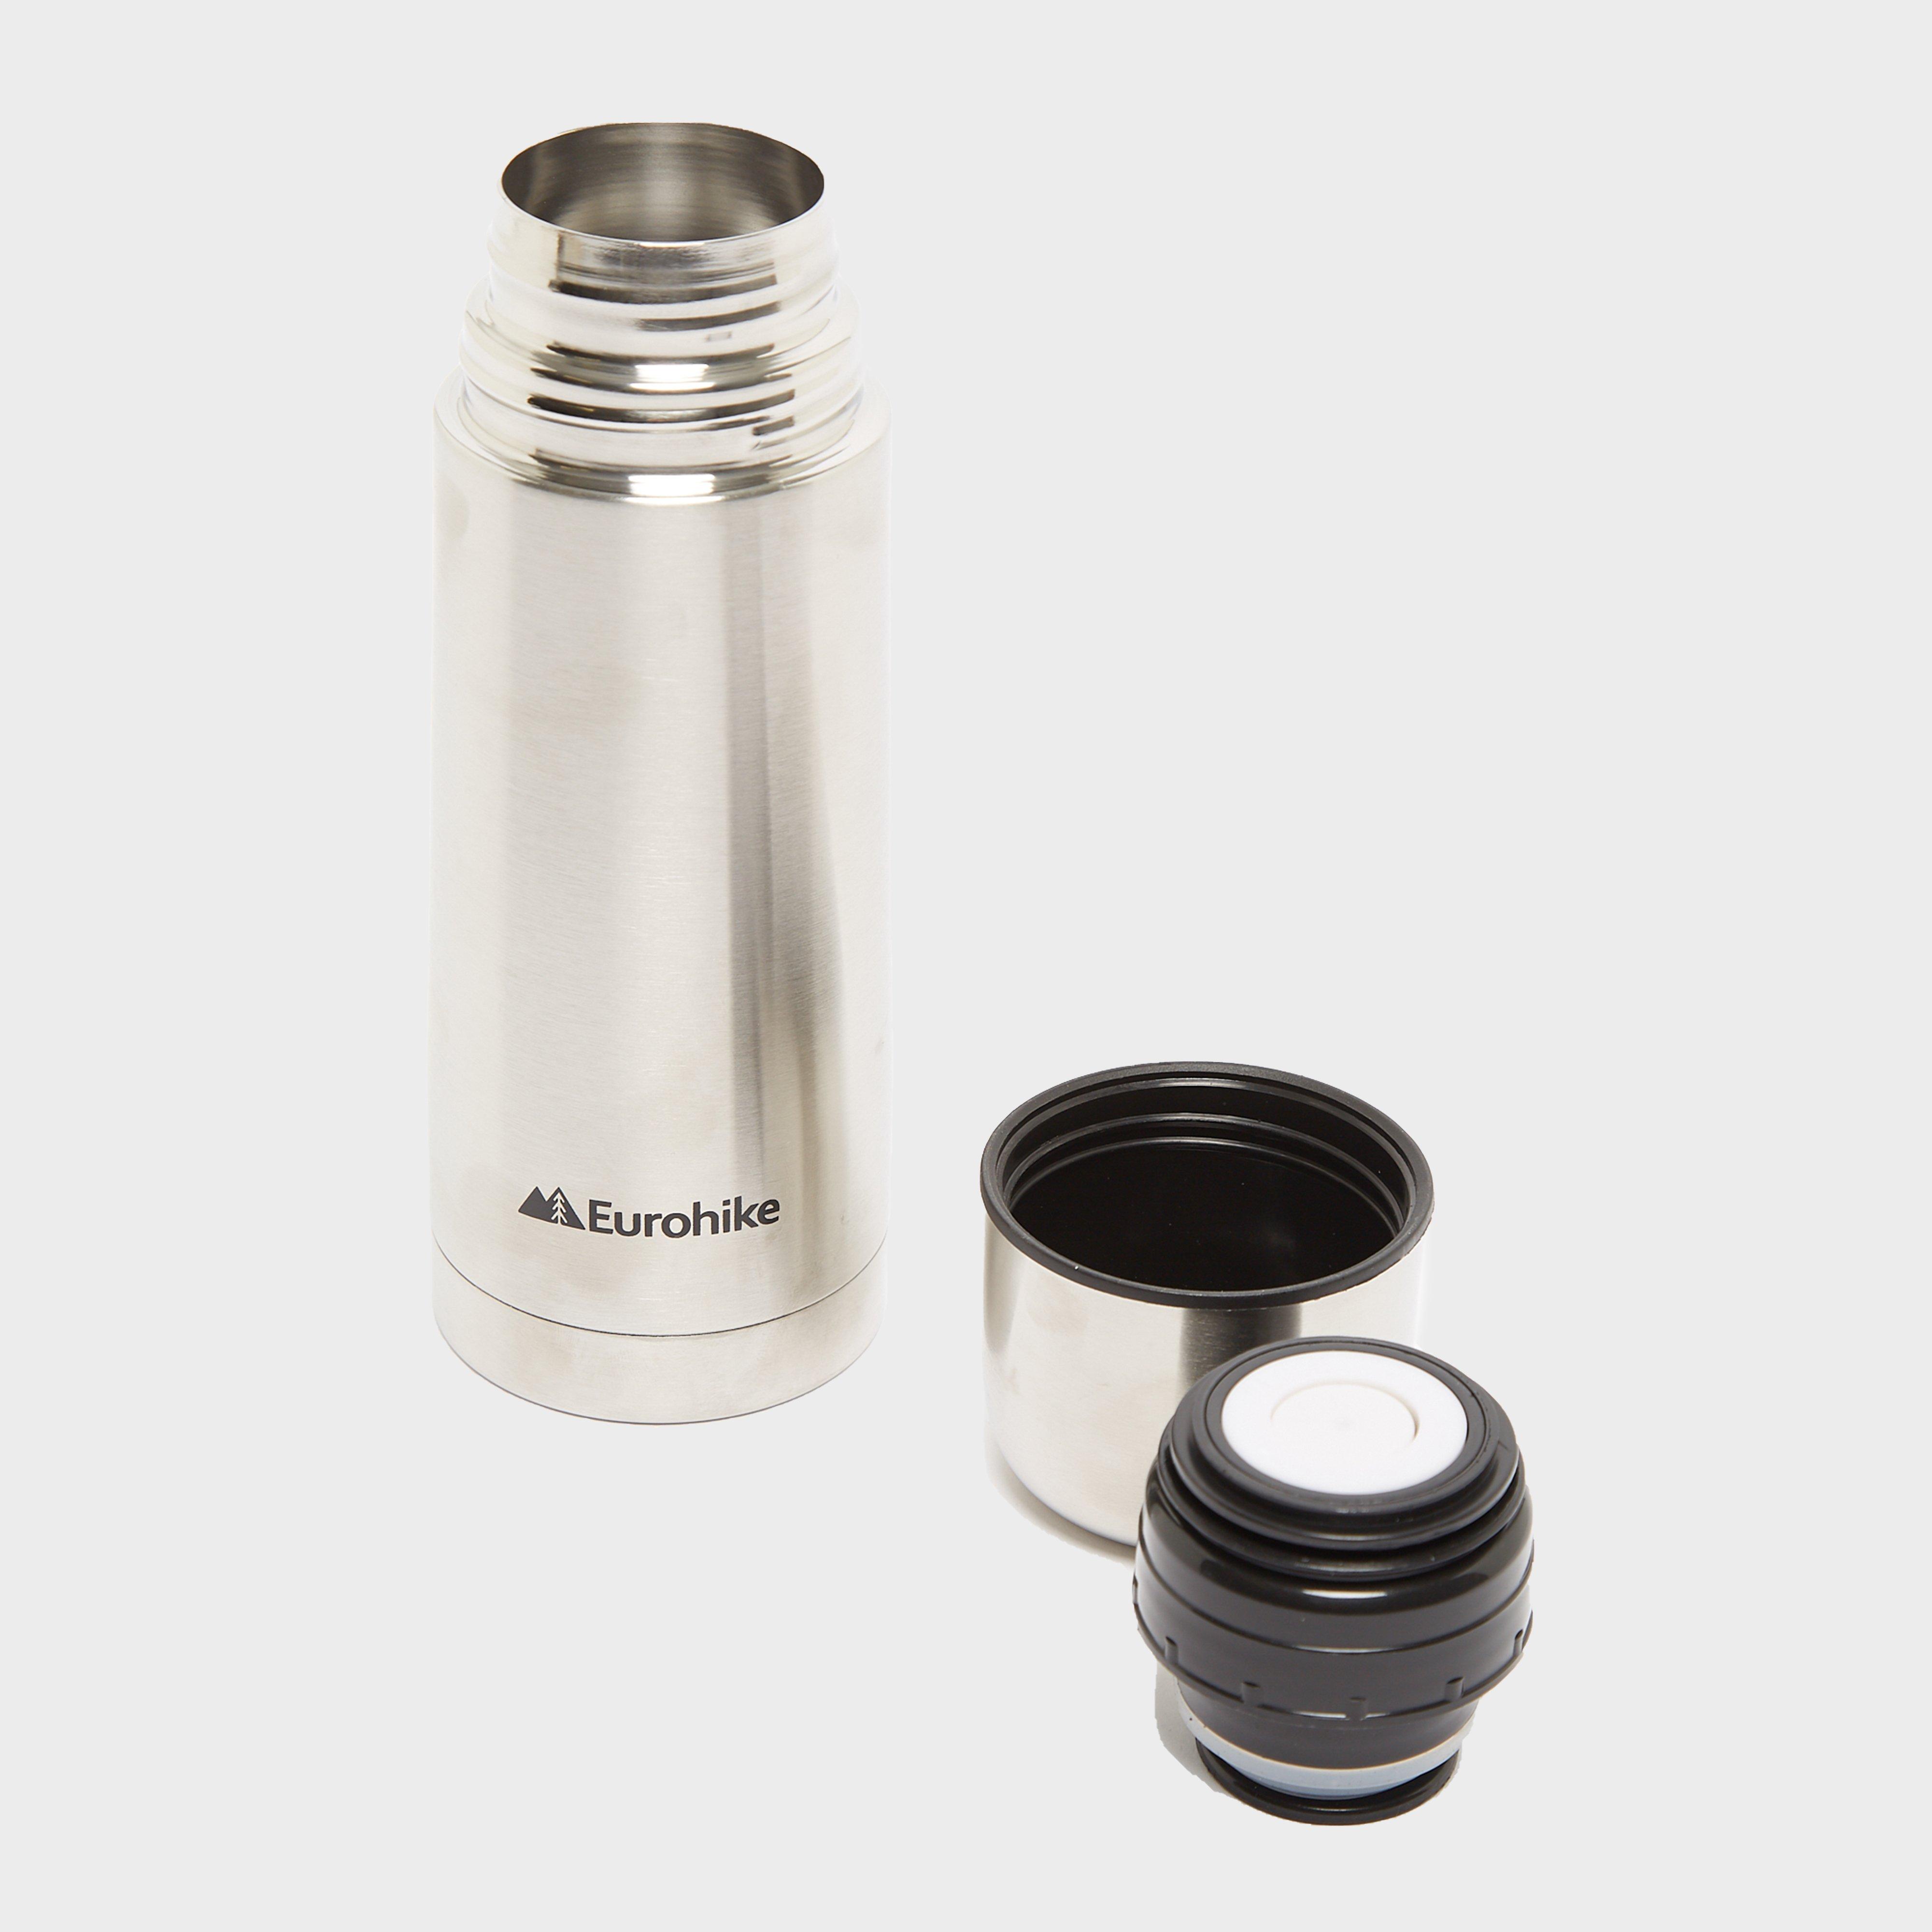 Eurohike Stainless Steel Flask (300ml) Review